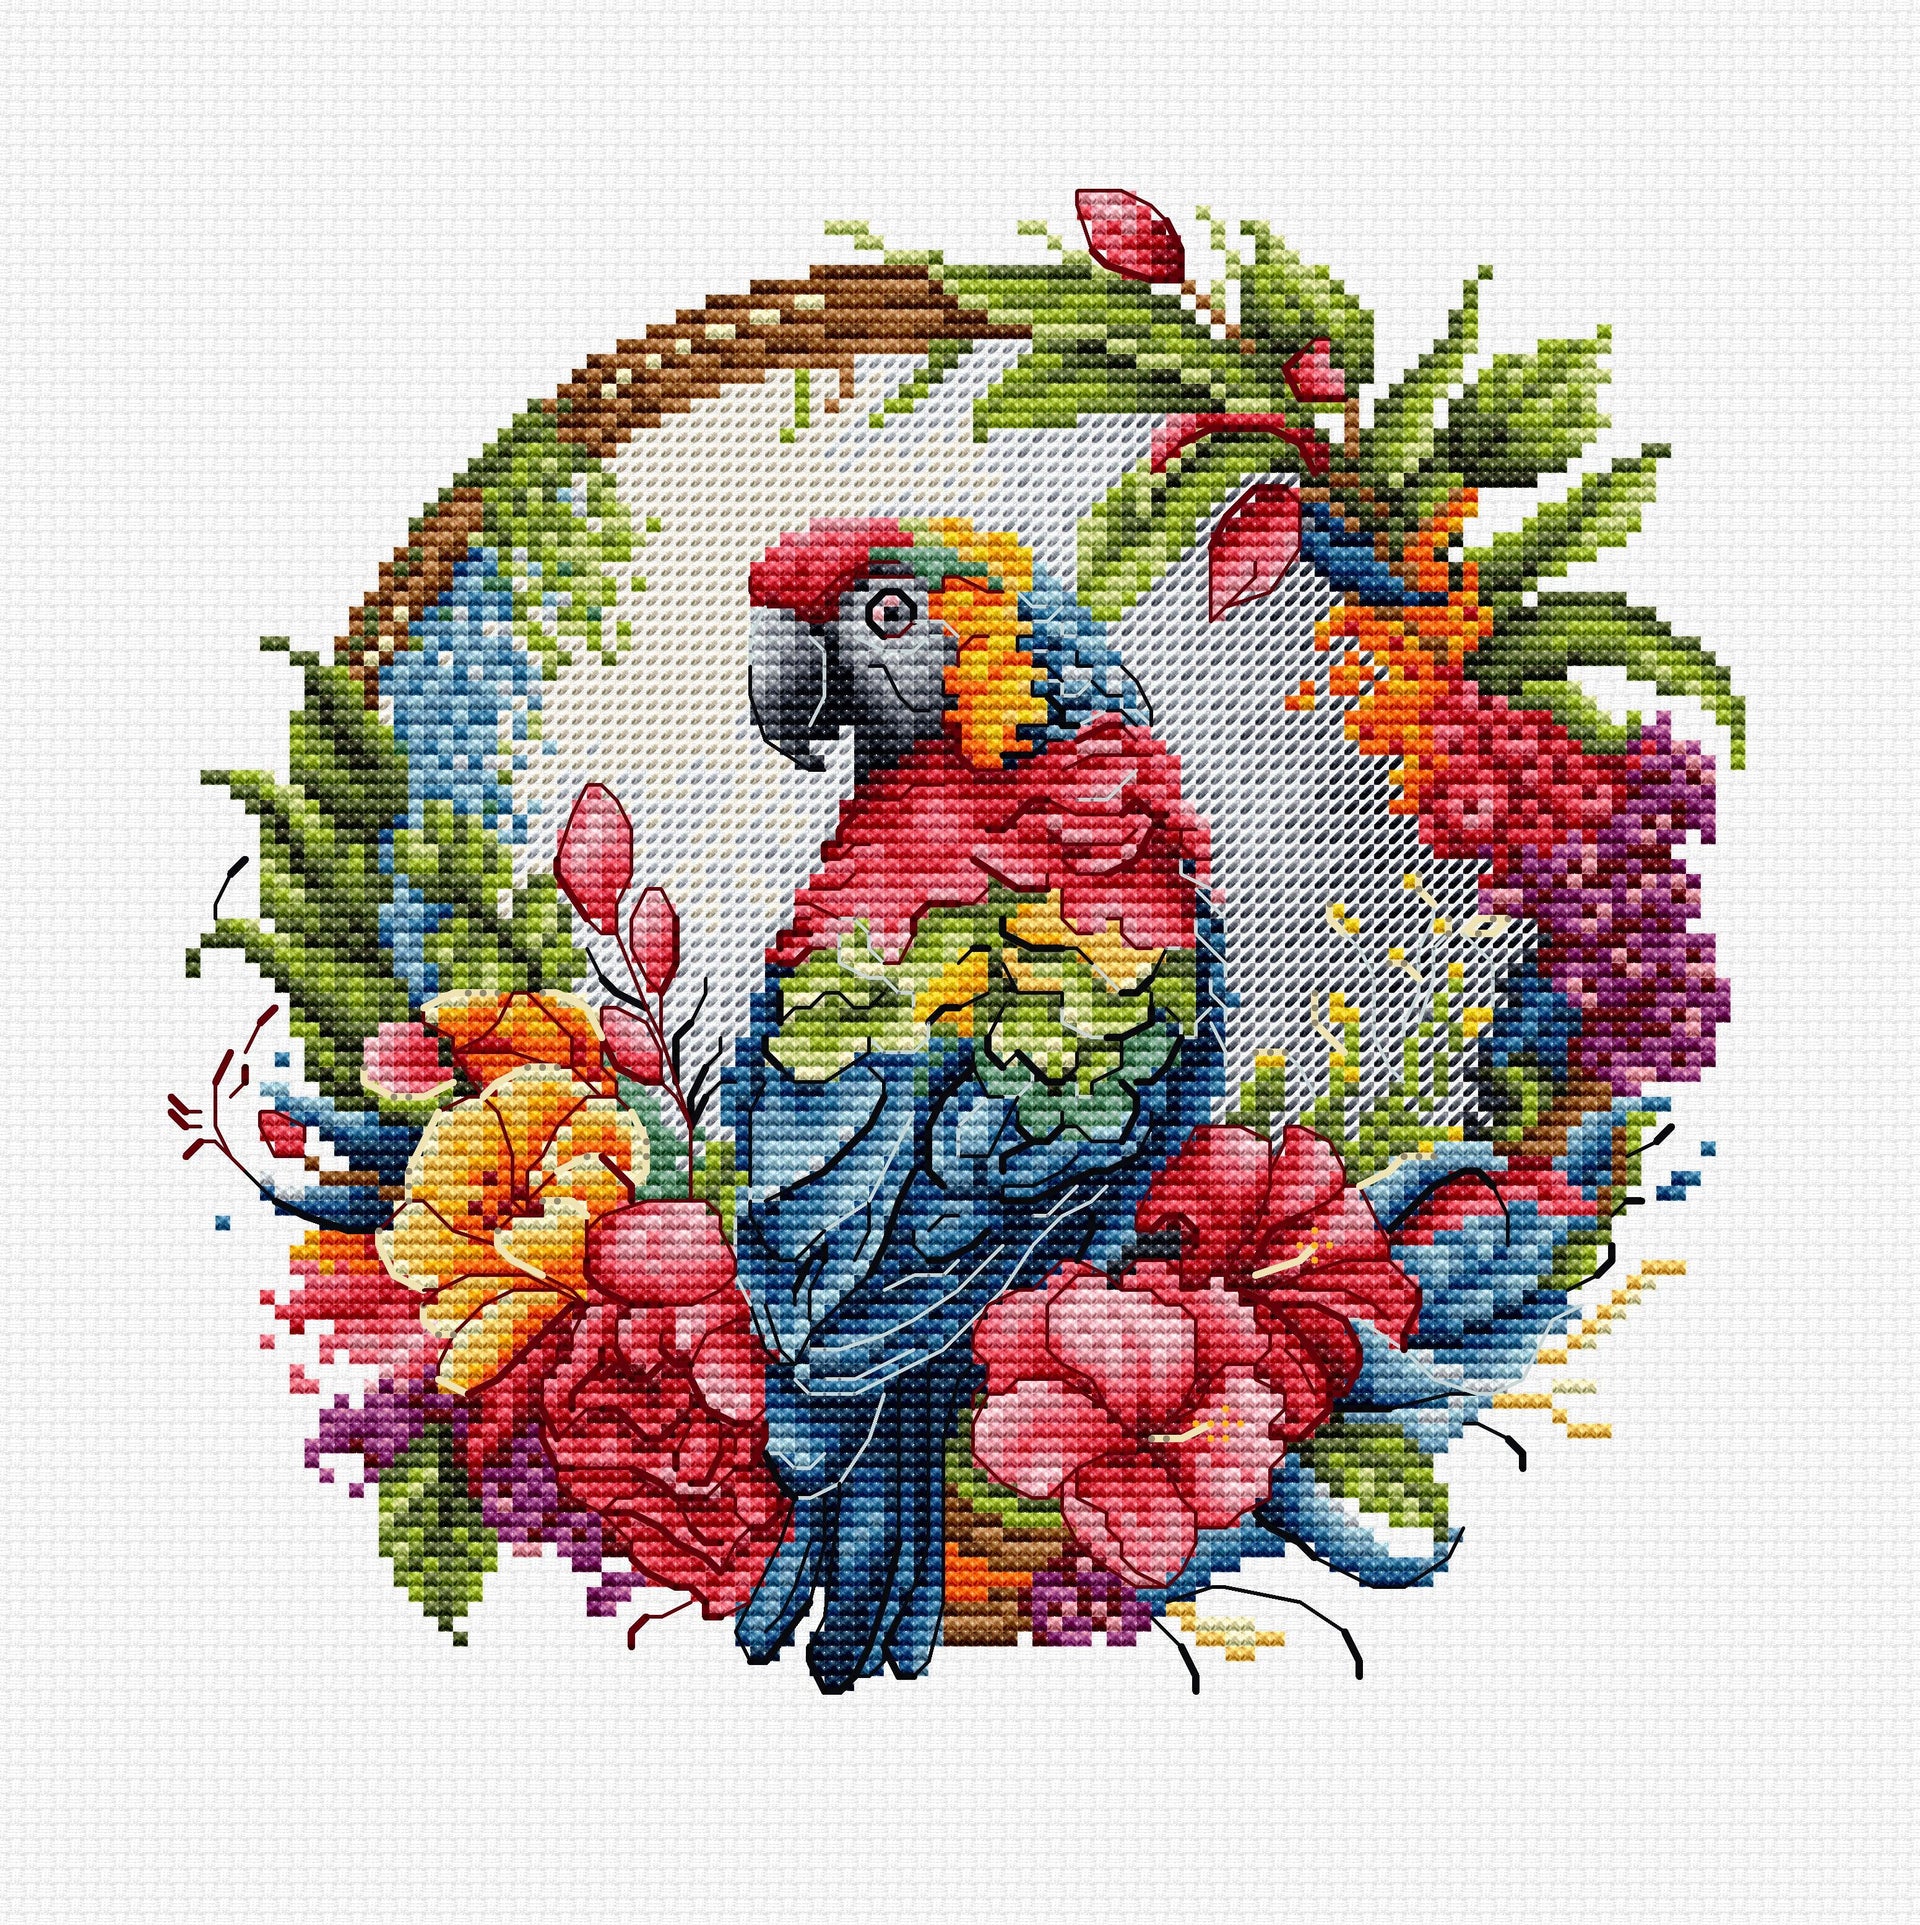 Cross Stitch Kit with Hoop Included Luca-S - The Tropical Parrot, BC201 - Luca-S Cross Stitch Kits